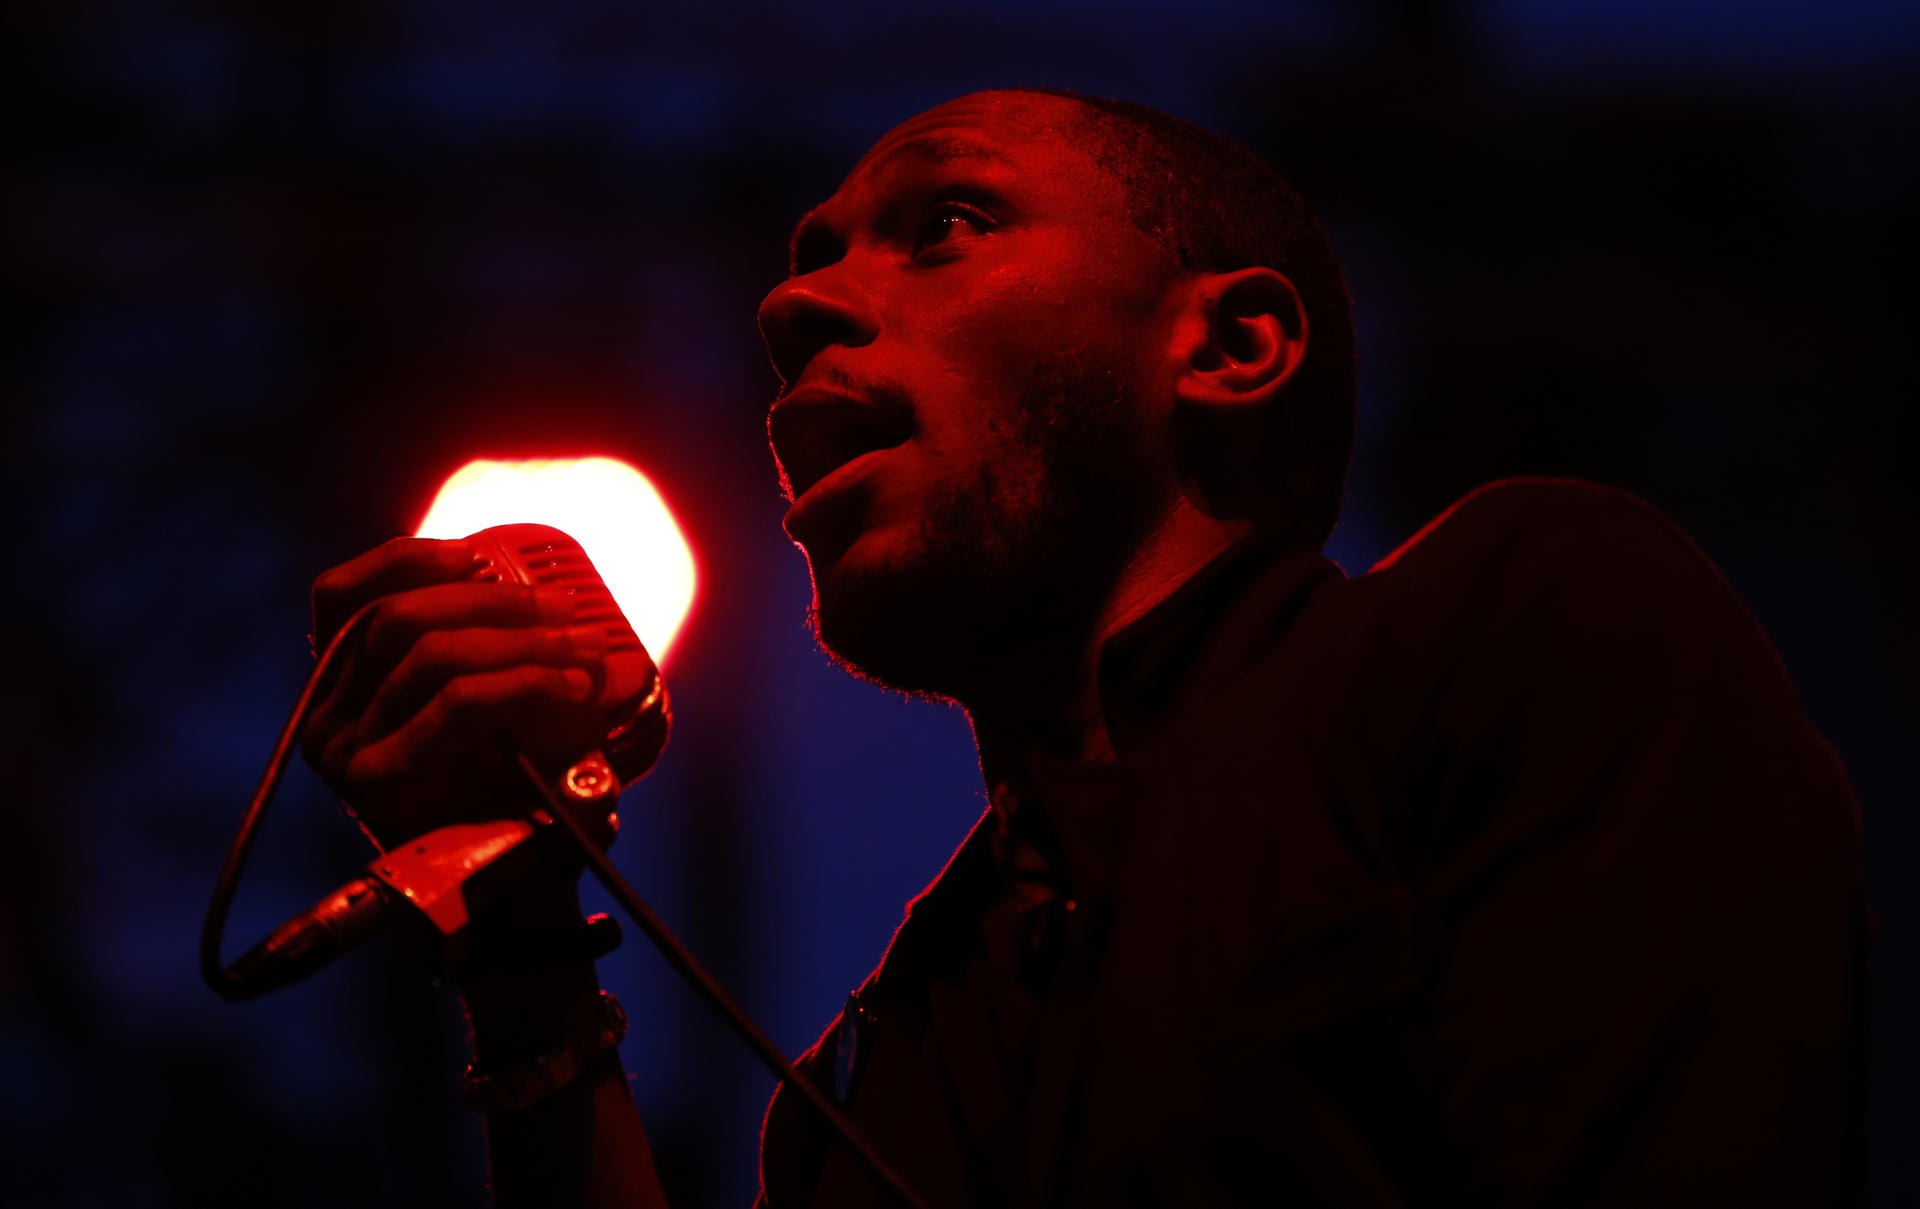 What Happened To The Artist Formerly Known As Mos Def?